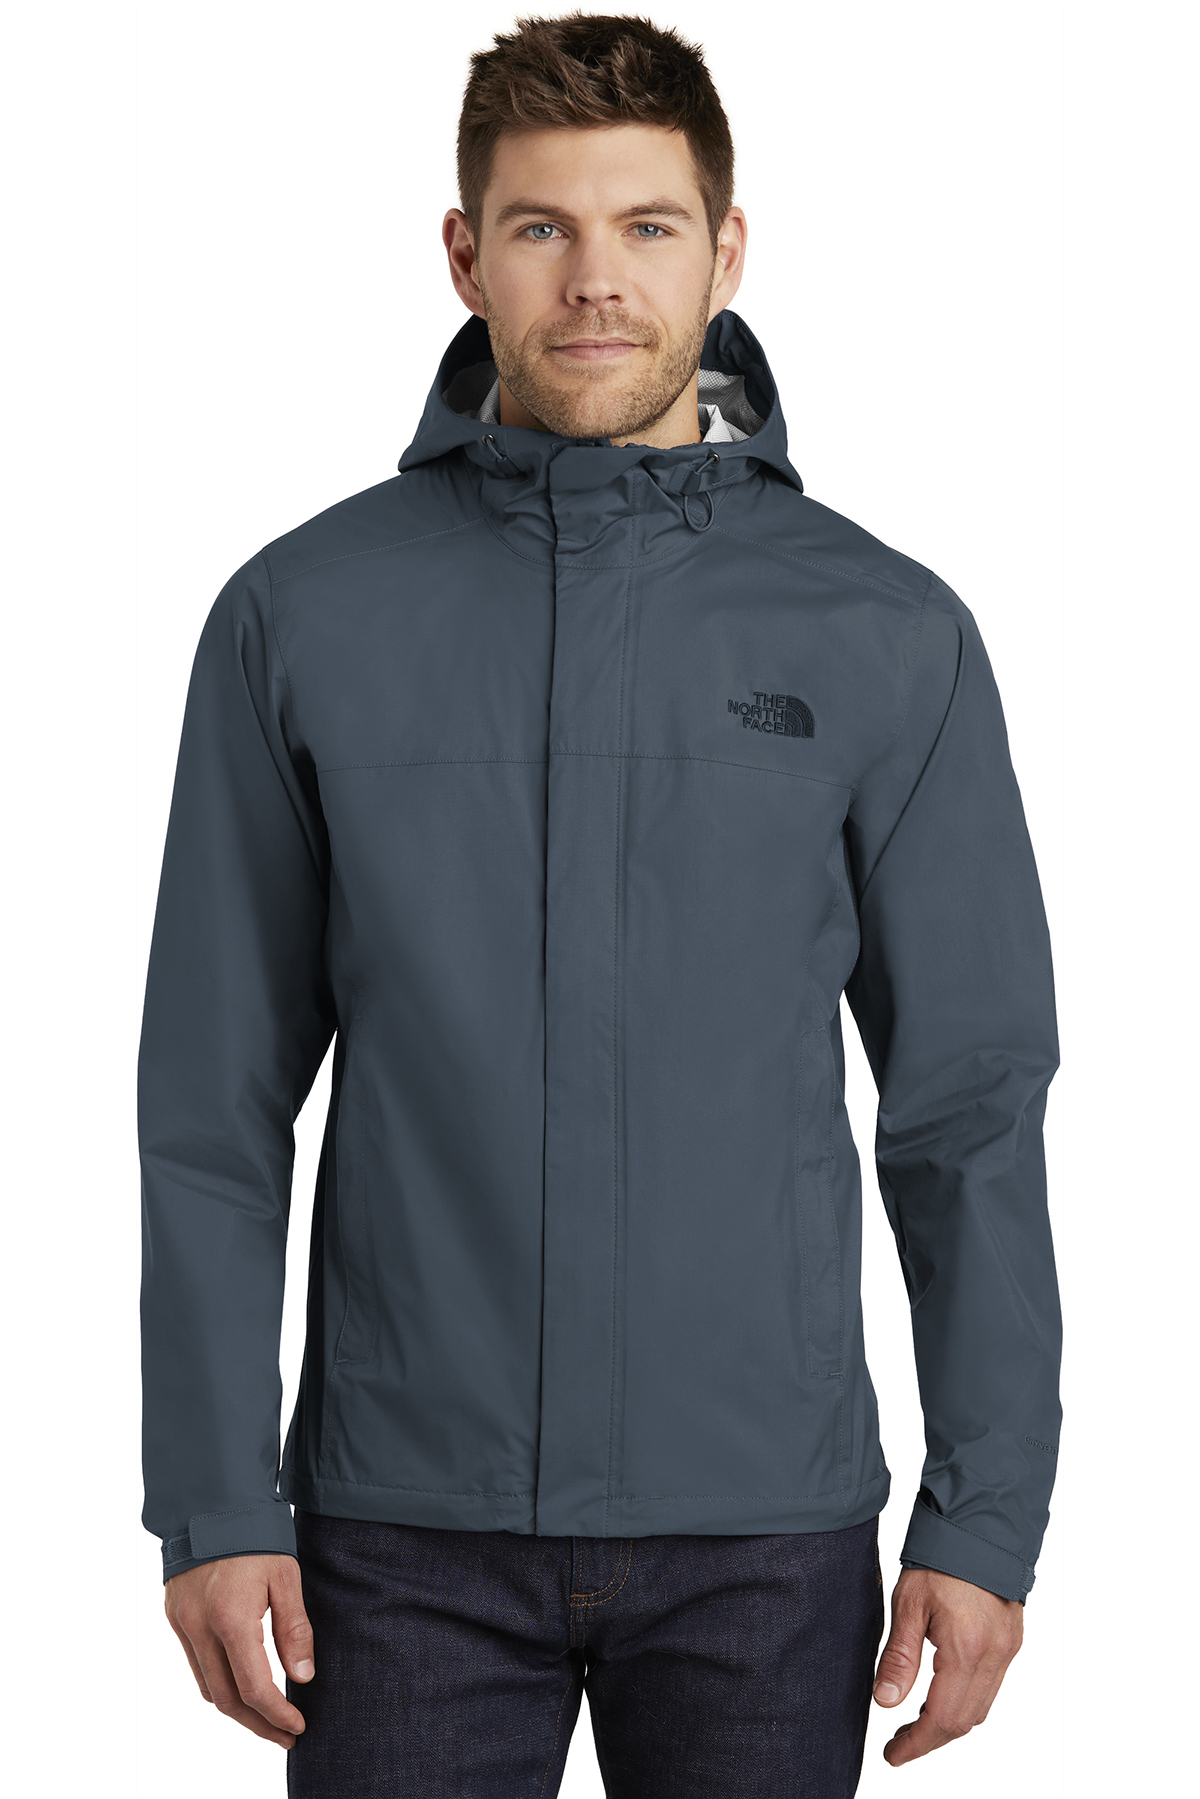 The North Face DryVent Rain Jackets